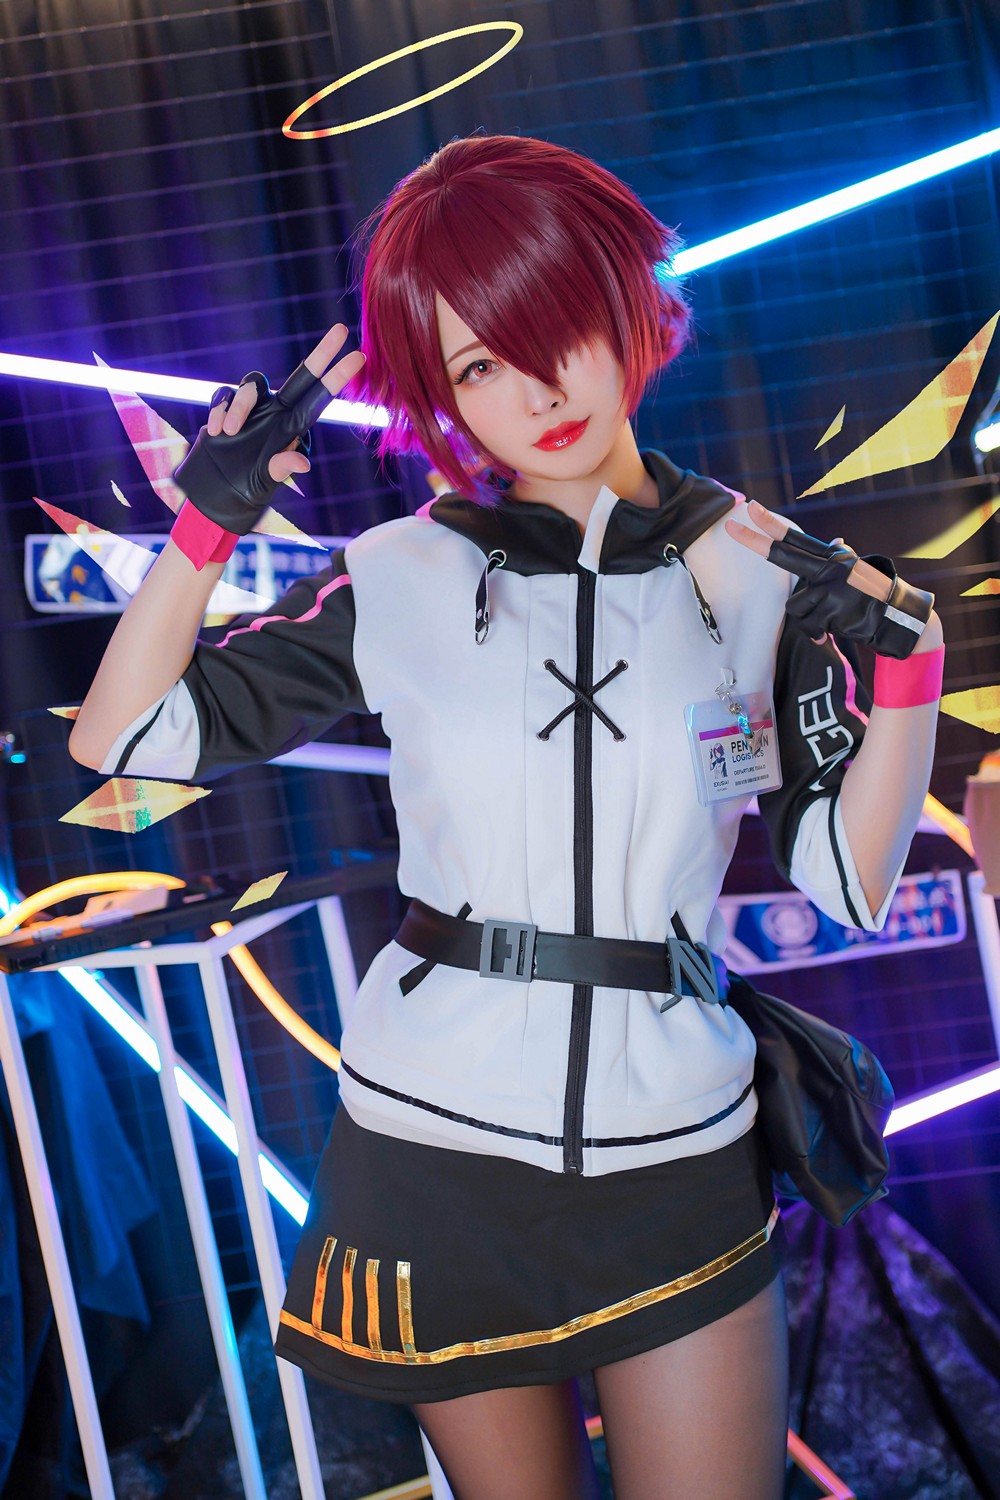 [Cosplay] Arty Huang - Arknights Exusiai [30P] (6 February 2022) - COSPLAY -